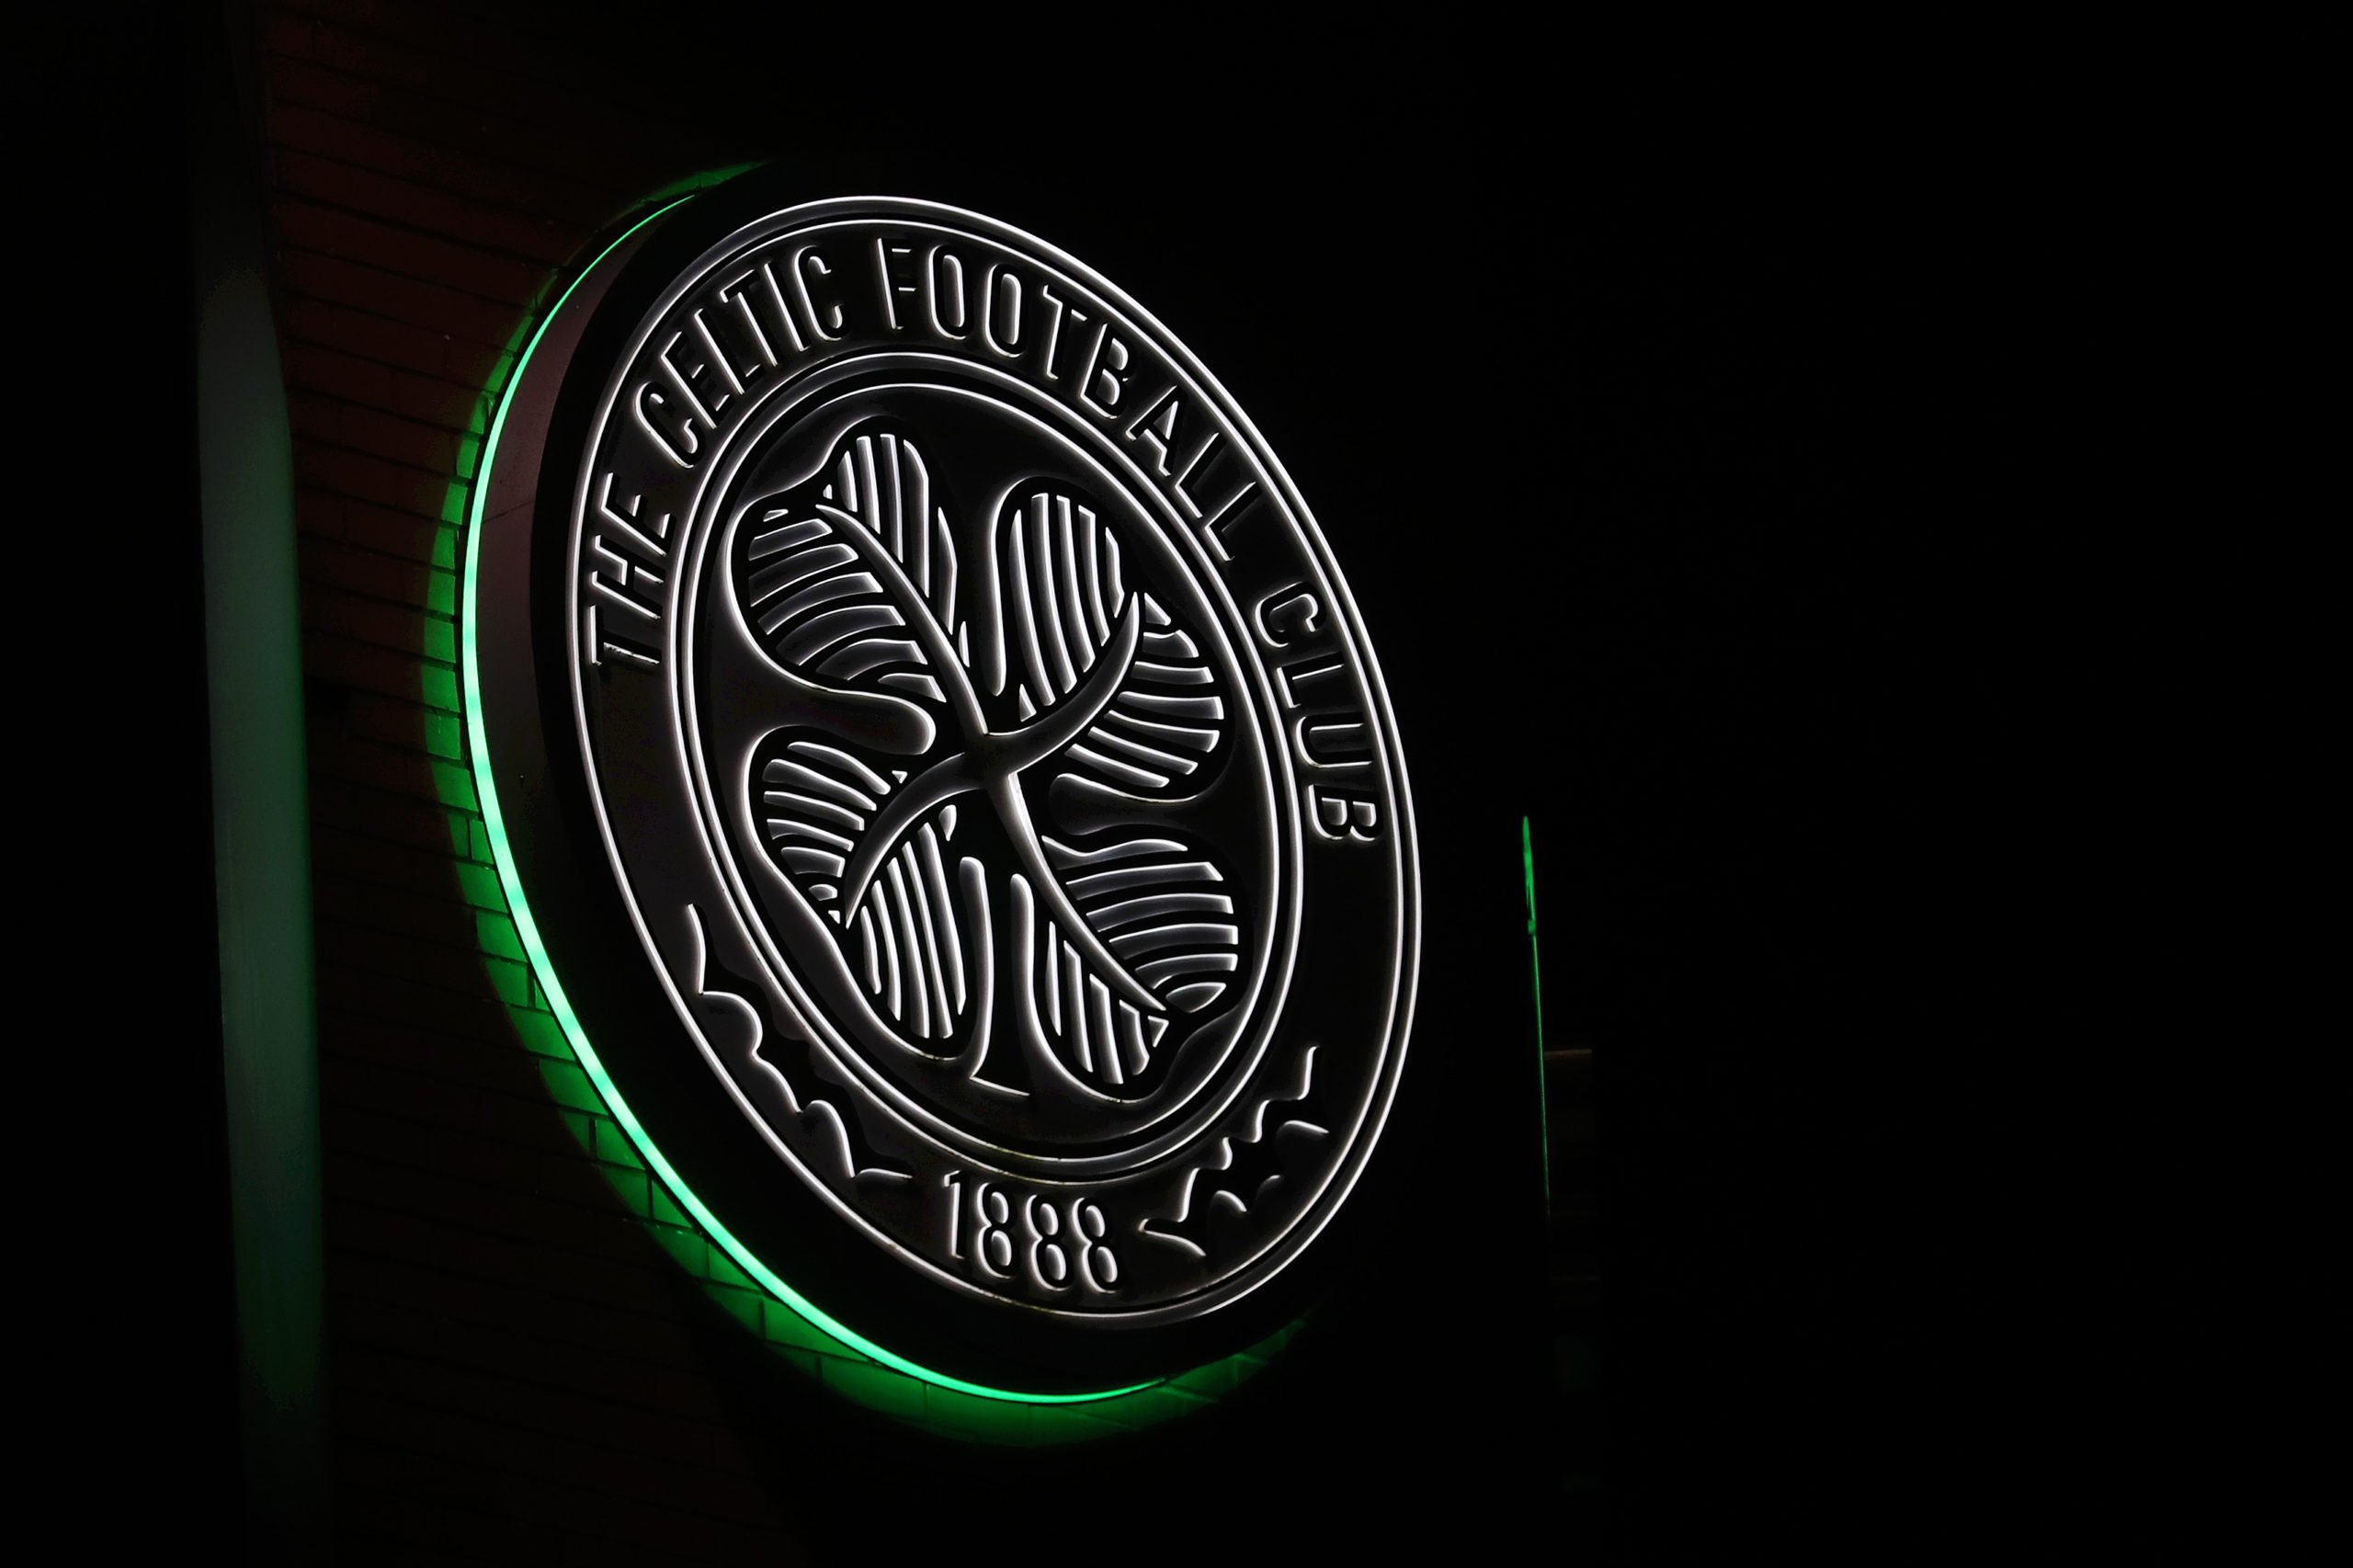 Season ticket holders delighted as Celtic announce coverage of Europa League playoff